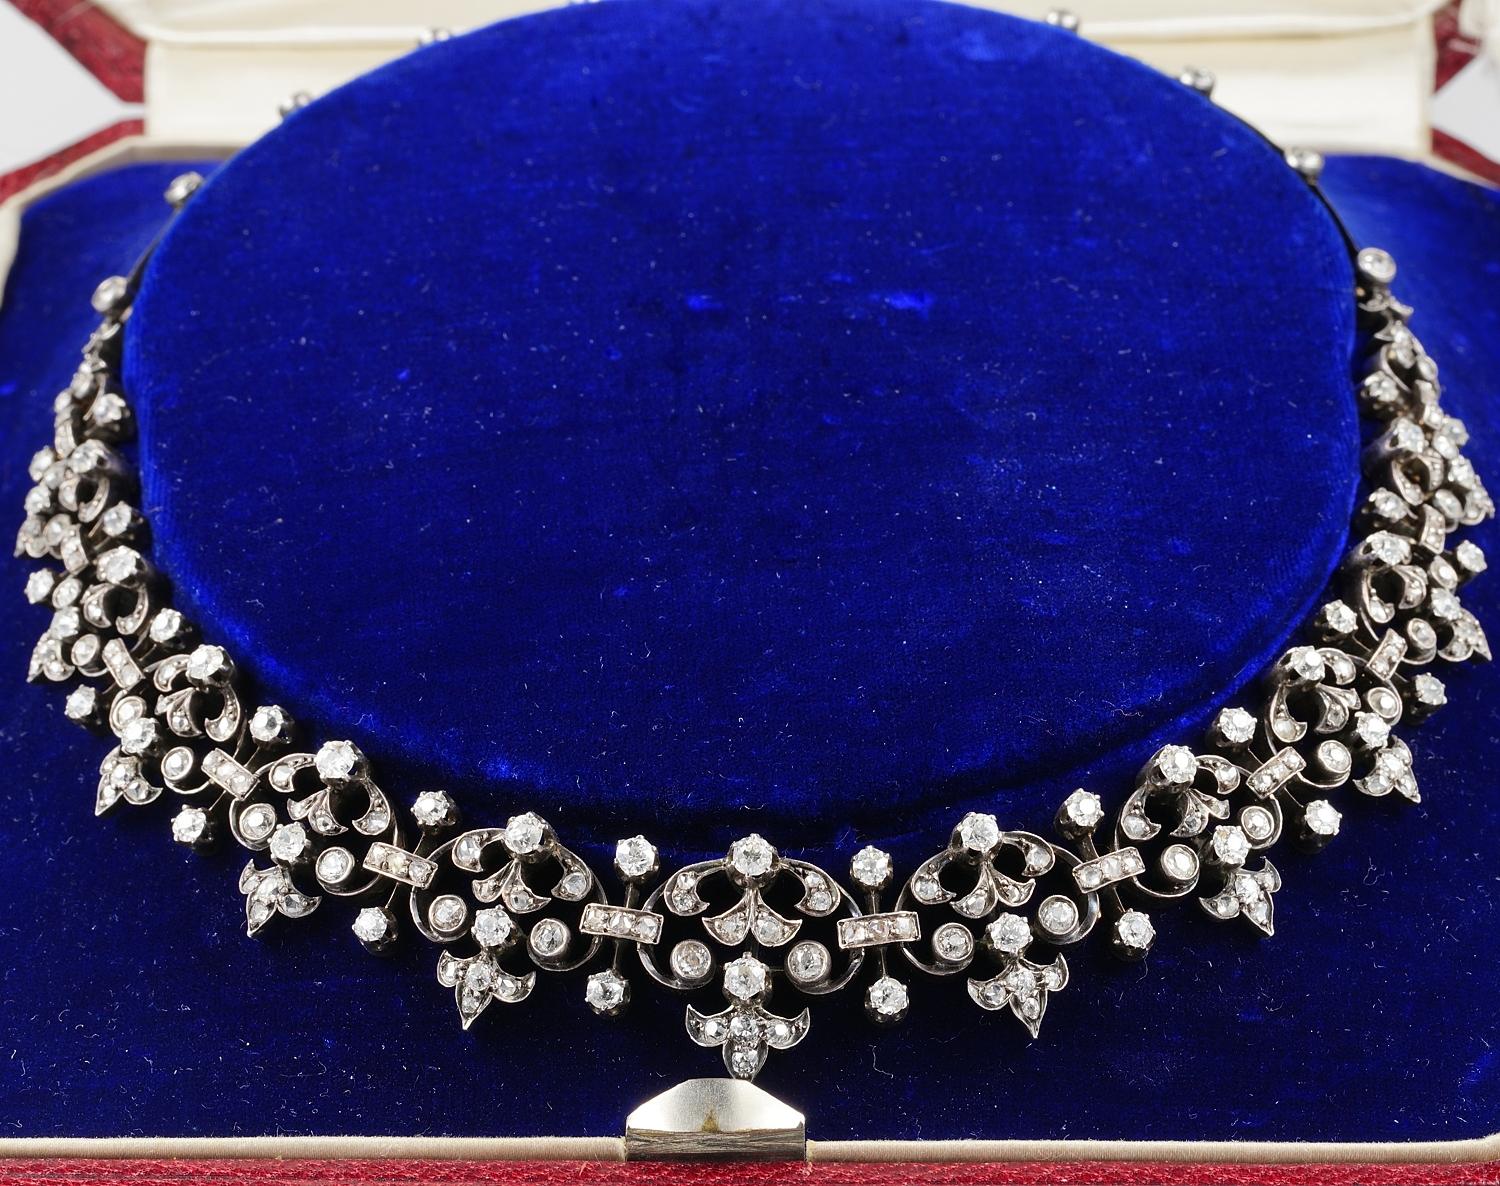 The Finest Antique!
It’s always exciting to discover a beautiful object that is unknown to the collecting world
What kind of lady held this beauty in her jewellery box at the time
Was it a gift from her husband? What ever it was this piece is really